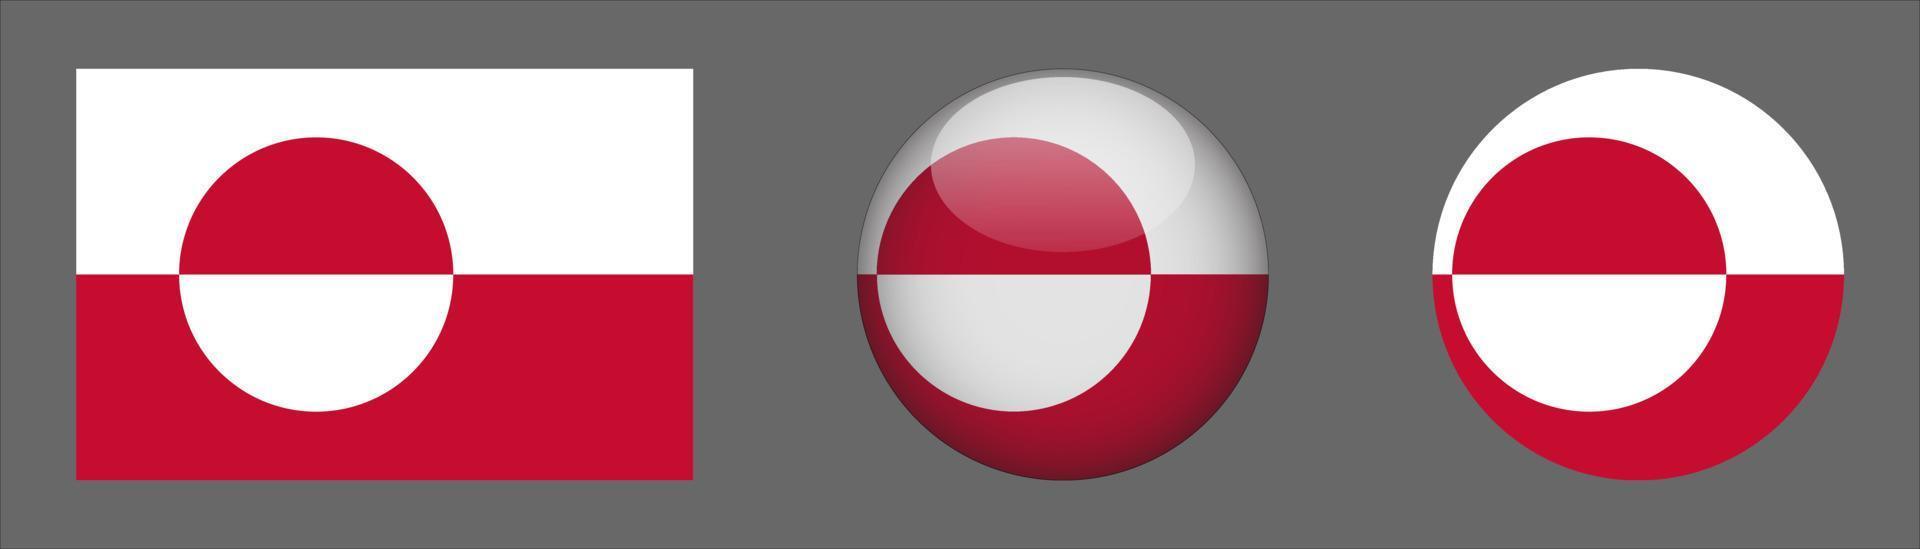 Greenland Flag Set Collection, Original Size Ratio, 3d Rounded and Flat Rounded vector